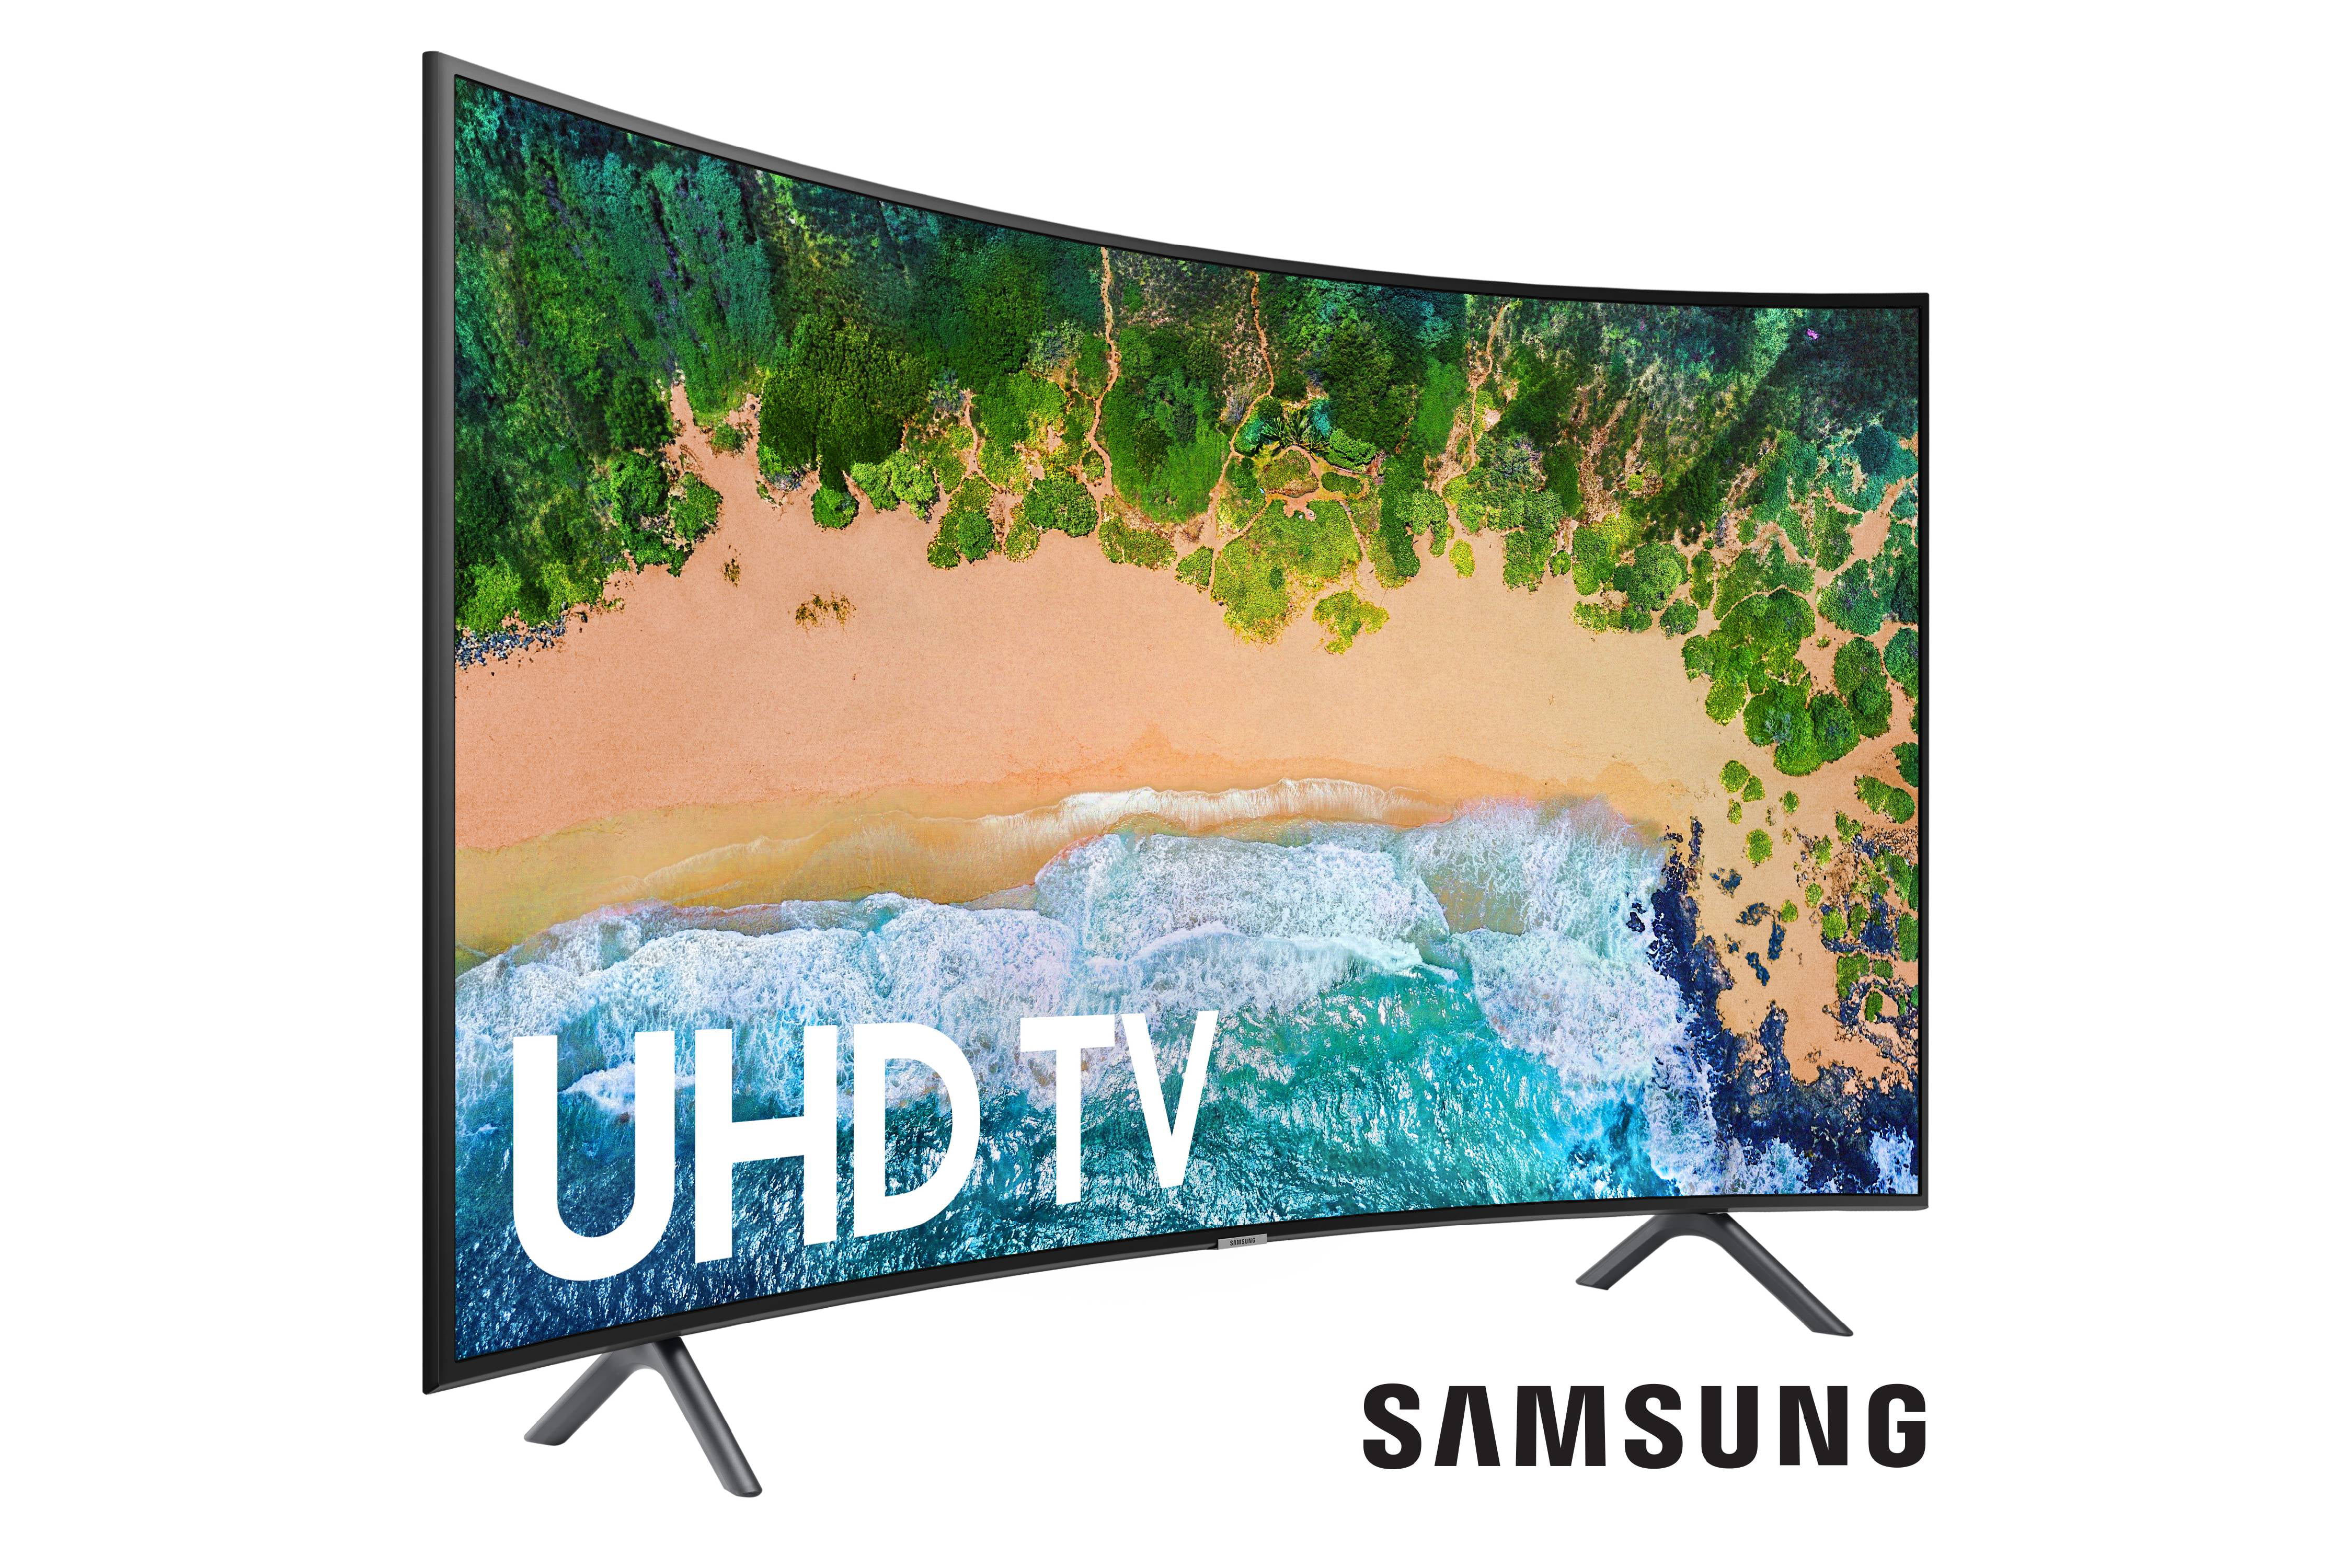 Samsung UN65NU8000 65" Smart LED 4K Ultra HD TV with HDR 